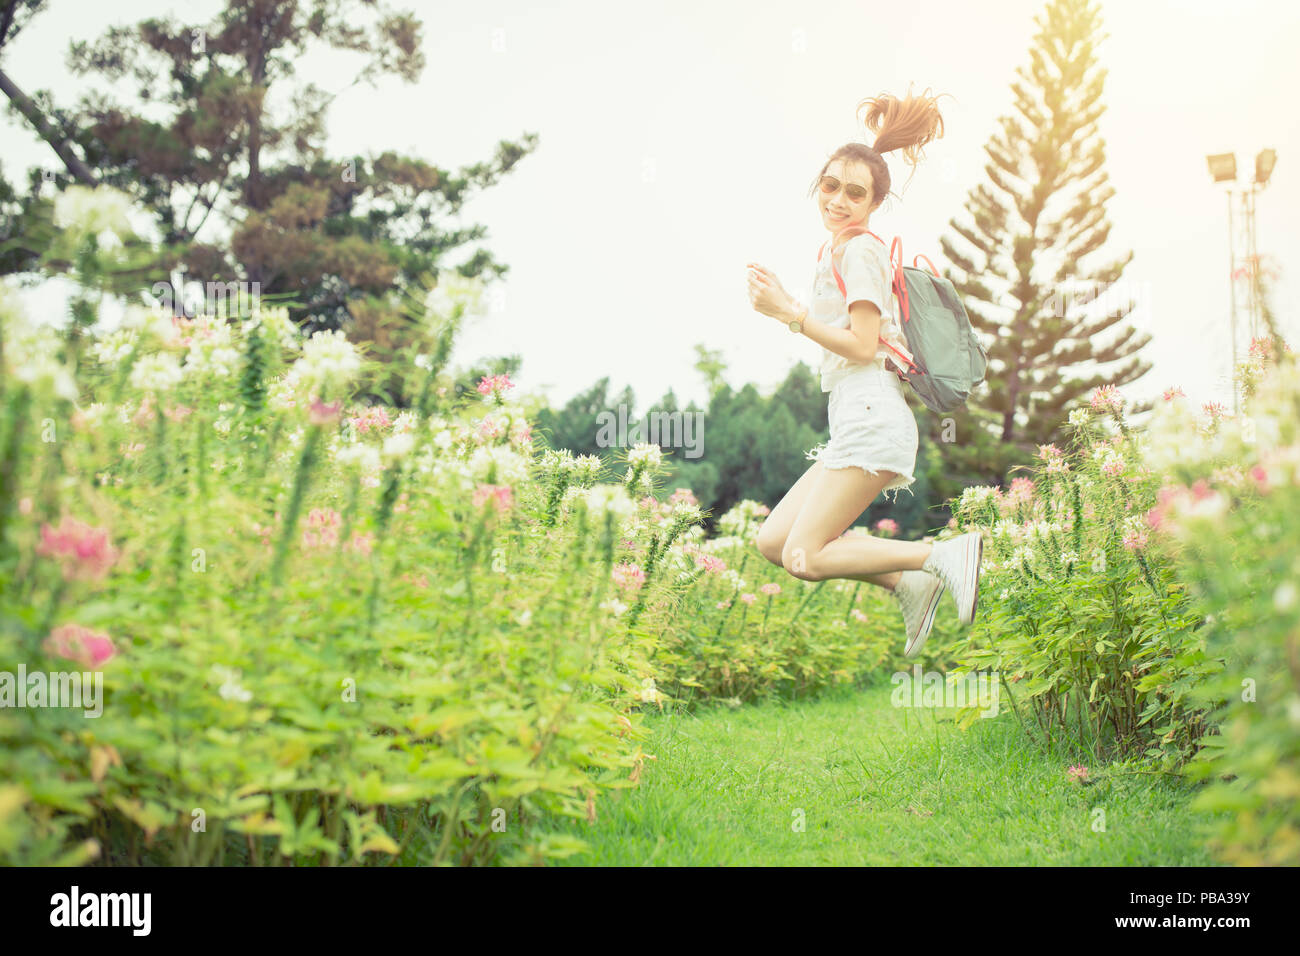 Girl cute teen life happiness jumping in the park outdoor Stock Photo